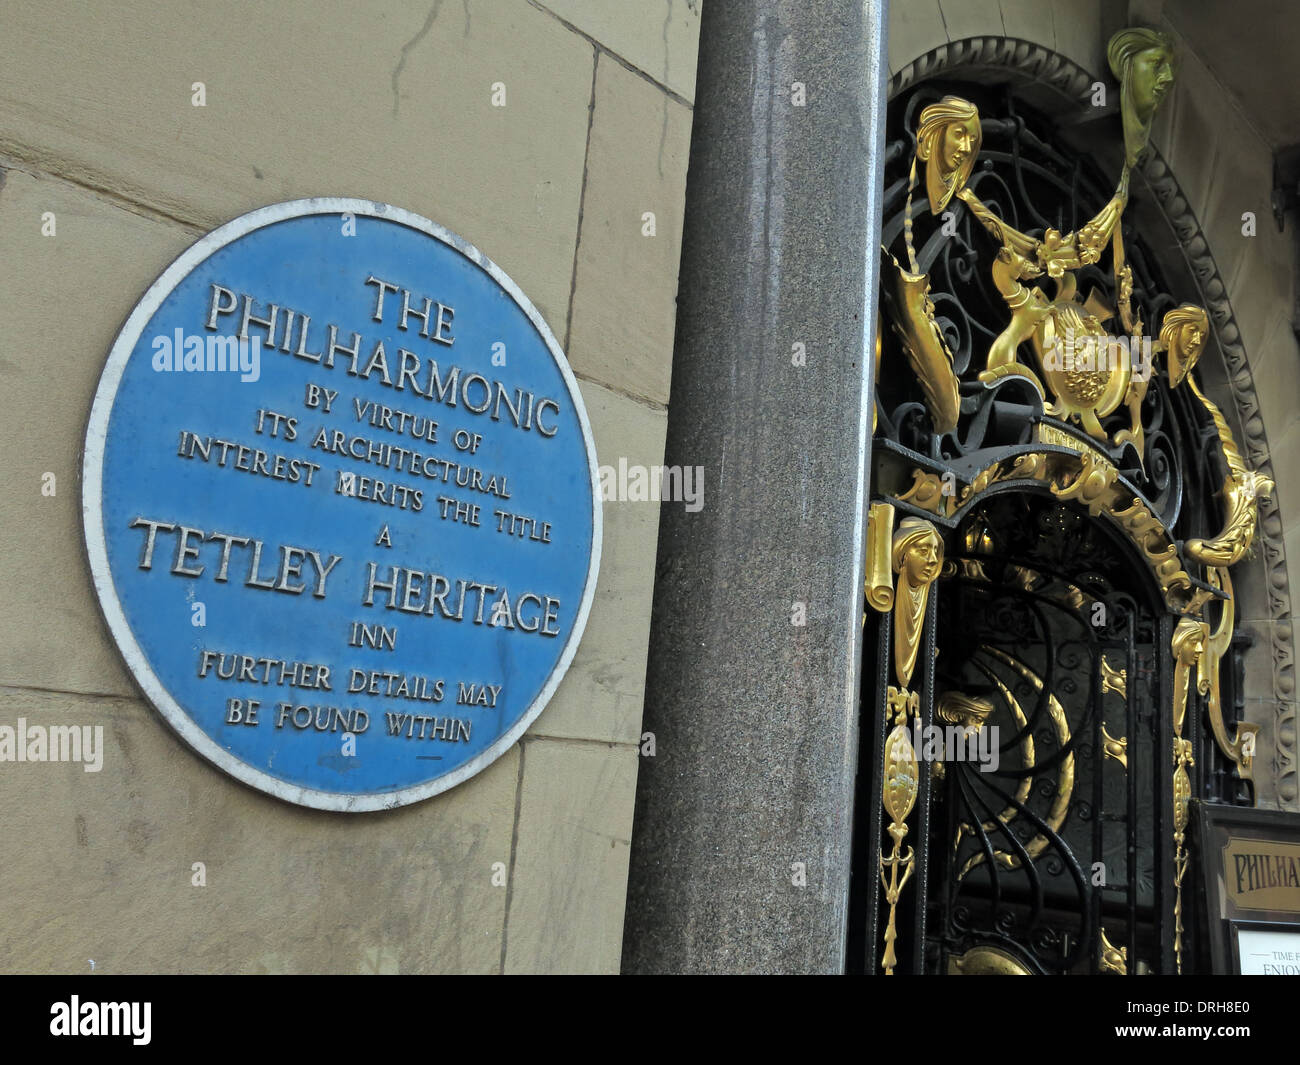 Entrance to the Philharmonic Dining Rooms tavern in Gold Liverpool maritime England UK - Blue Heritage Plaque Stock Photo